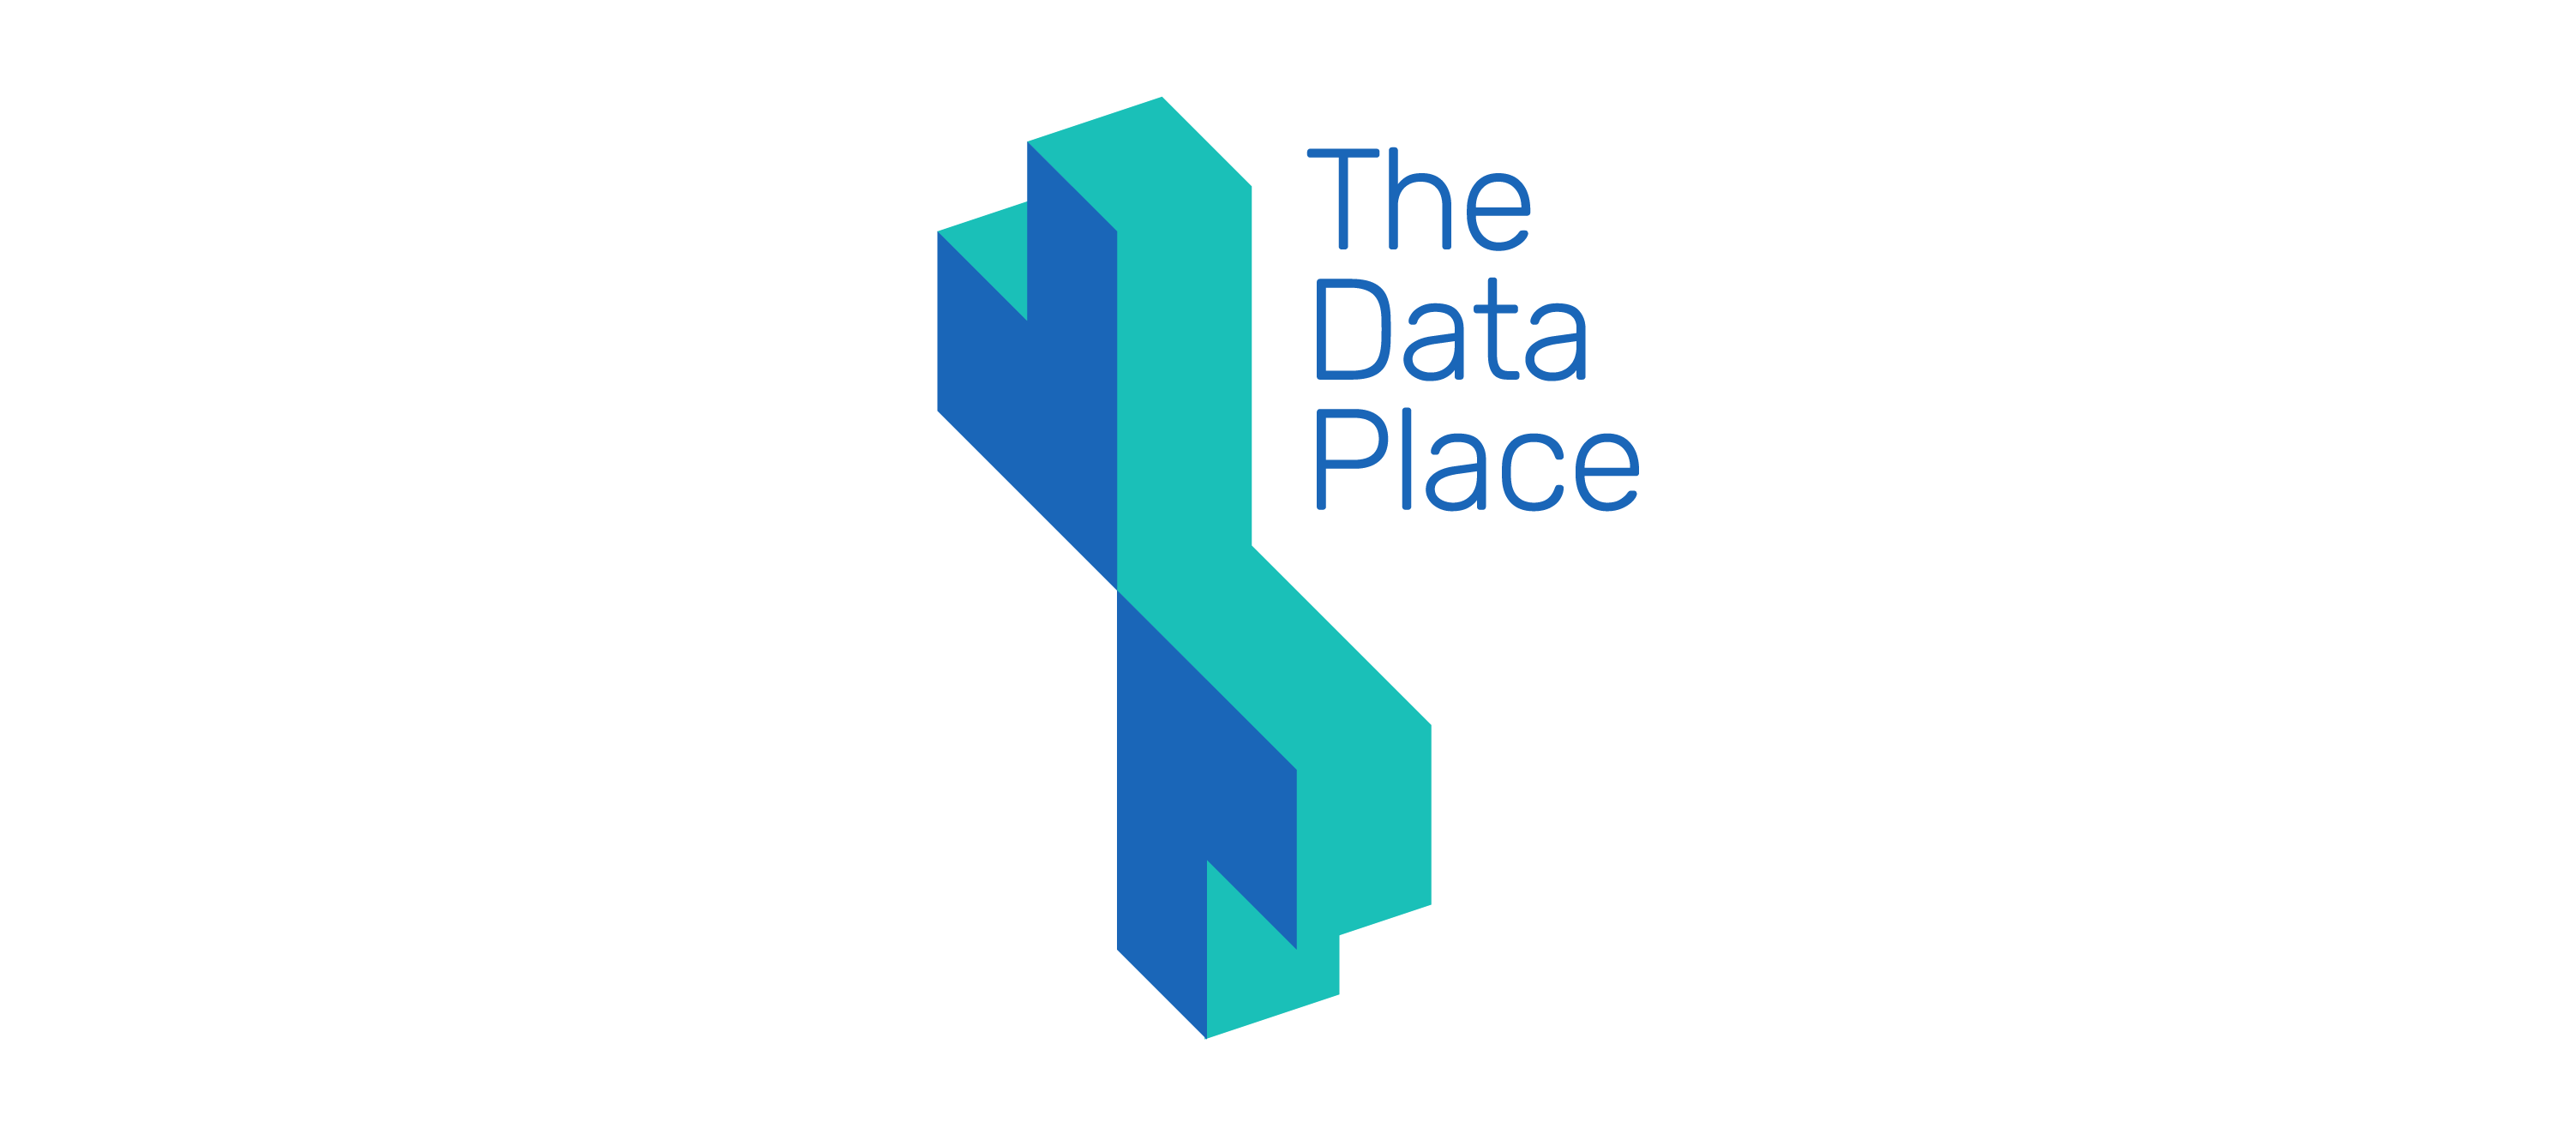 The Data Place